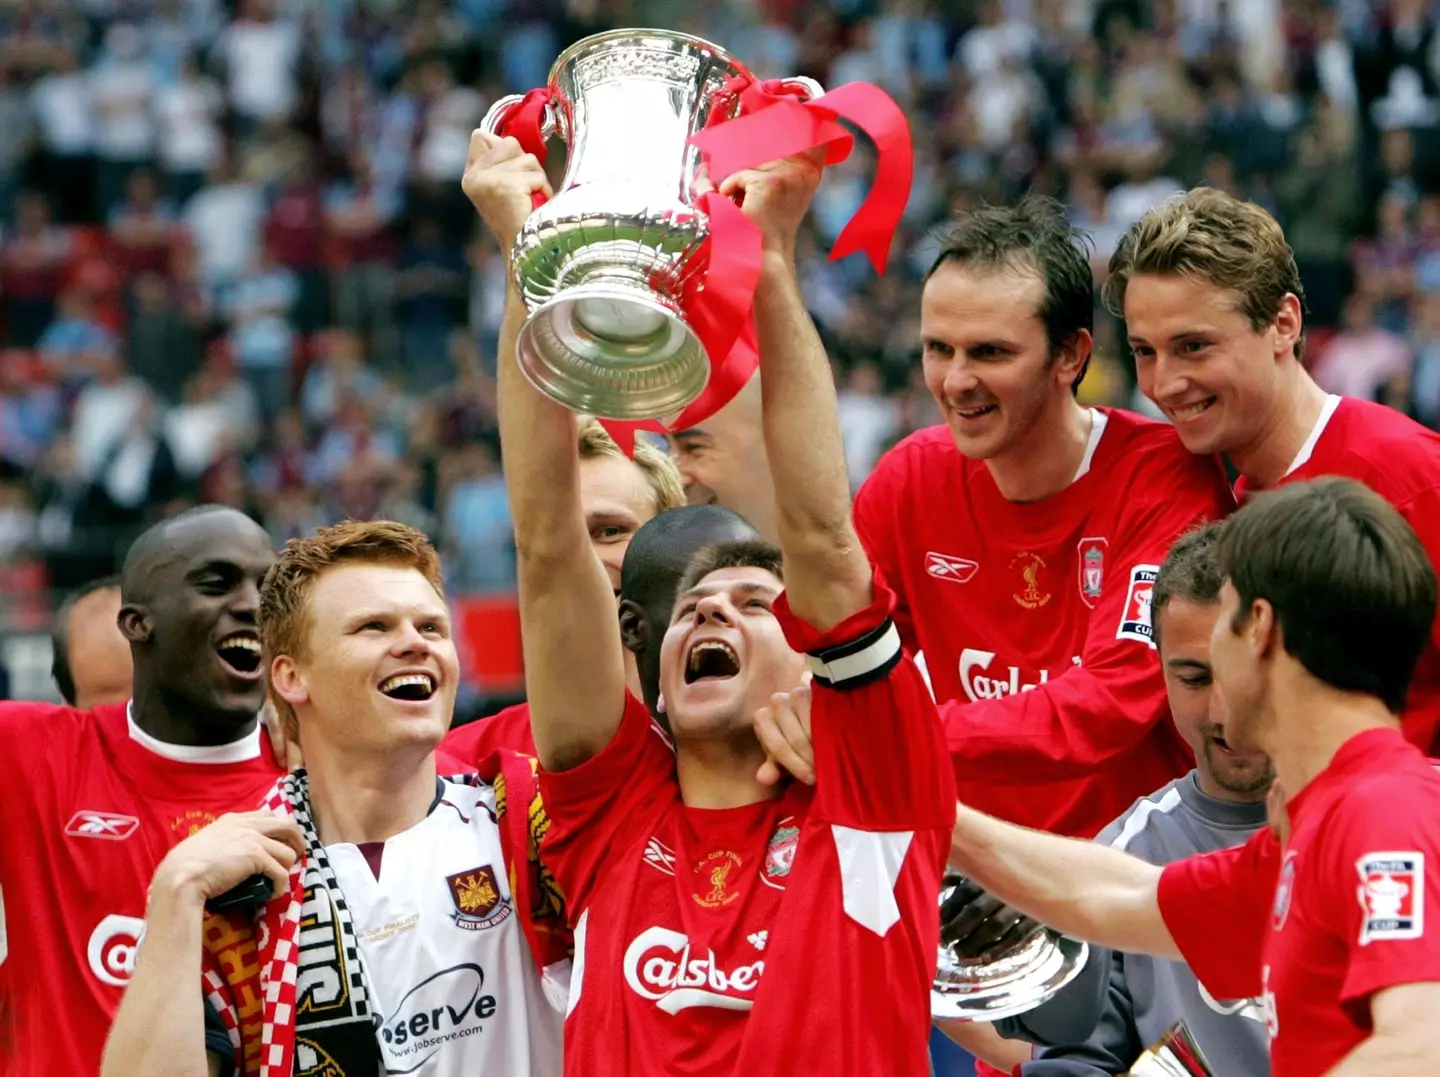 Gerrard was Liverpool captain during his legendary career. (Image